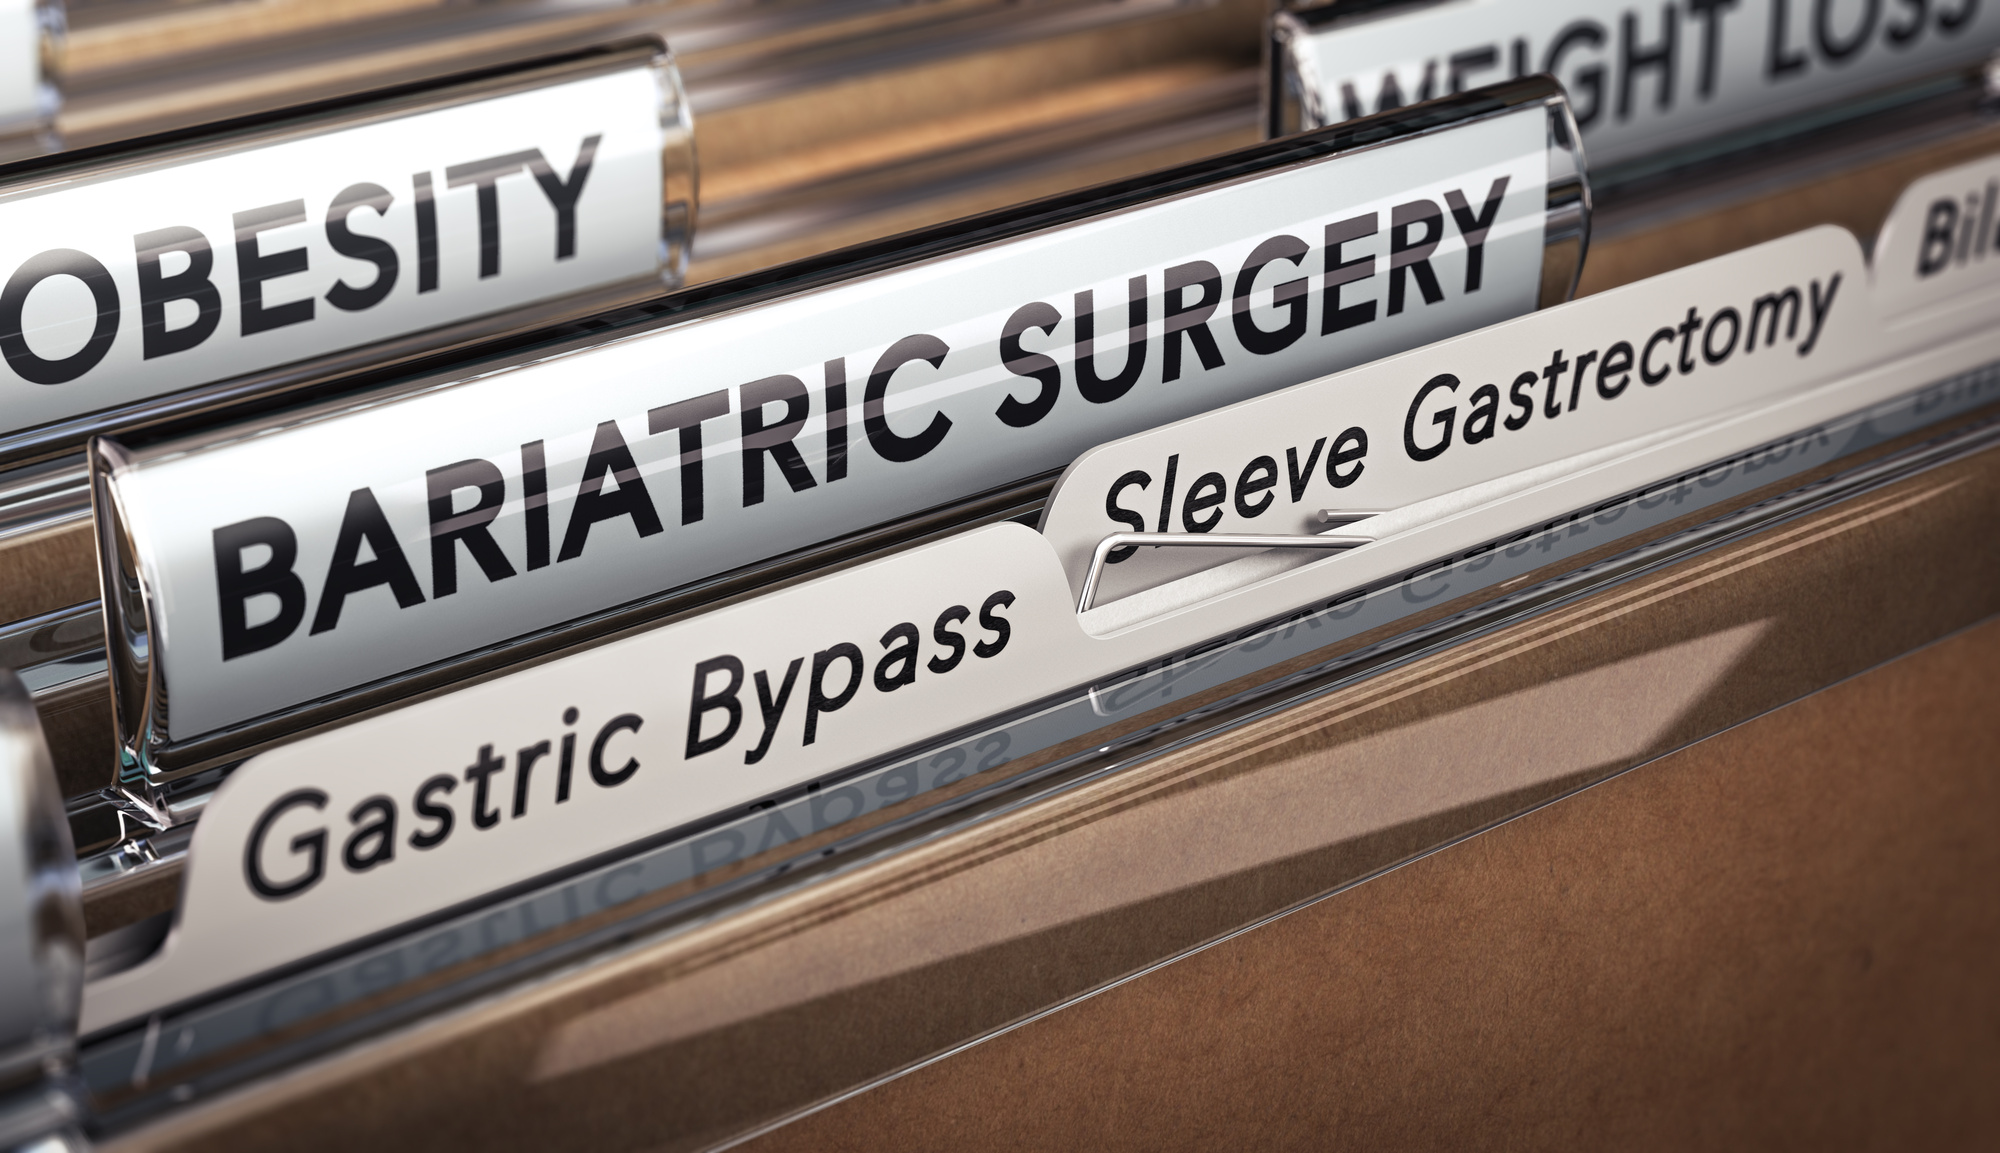 Folders with various titles in bold, including 'Bariatric Surgery'